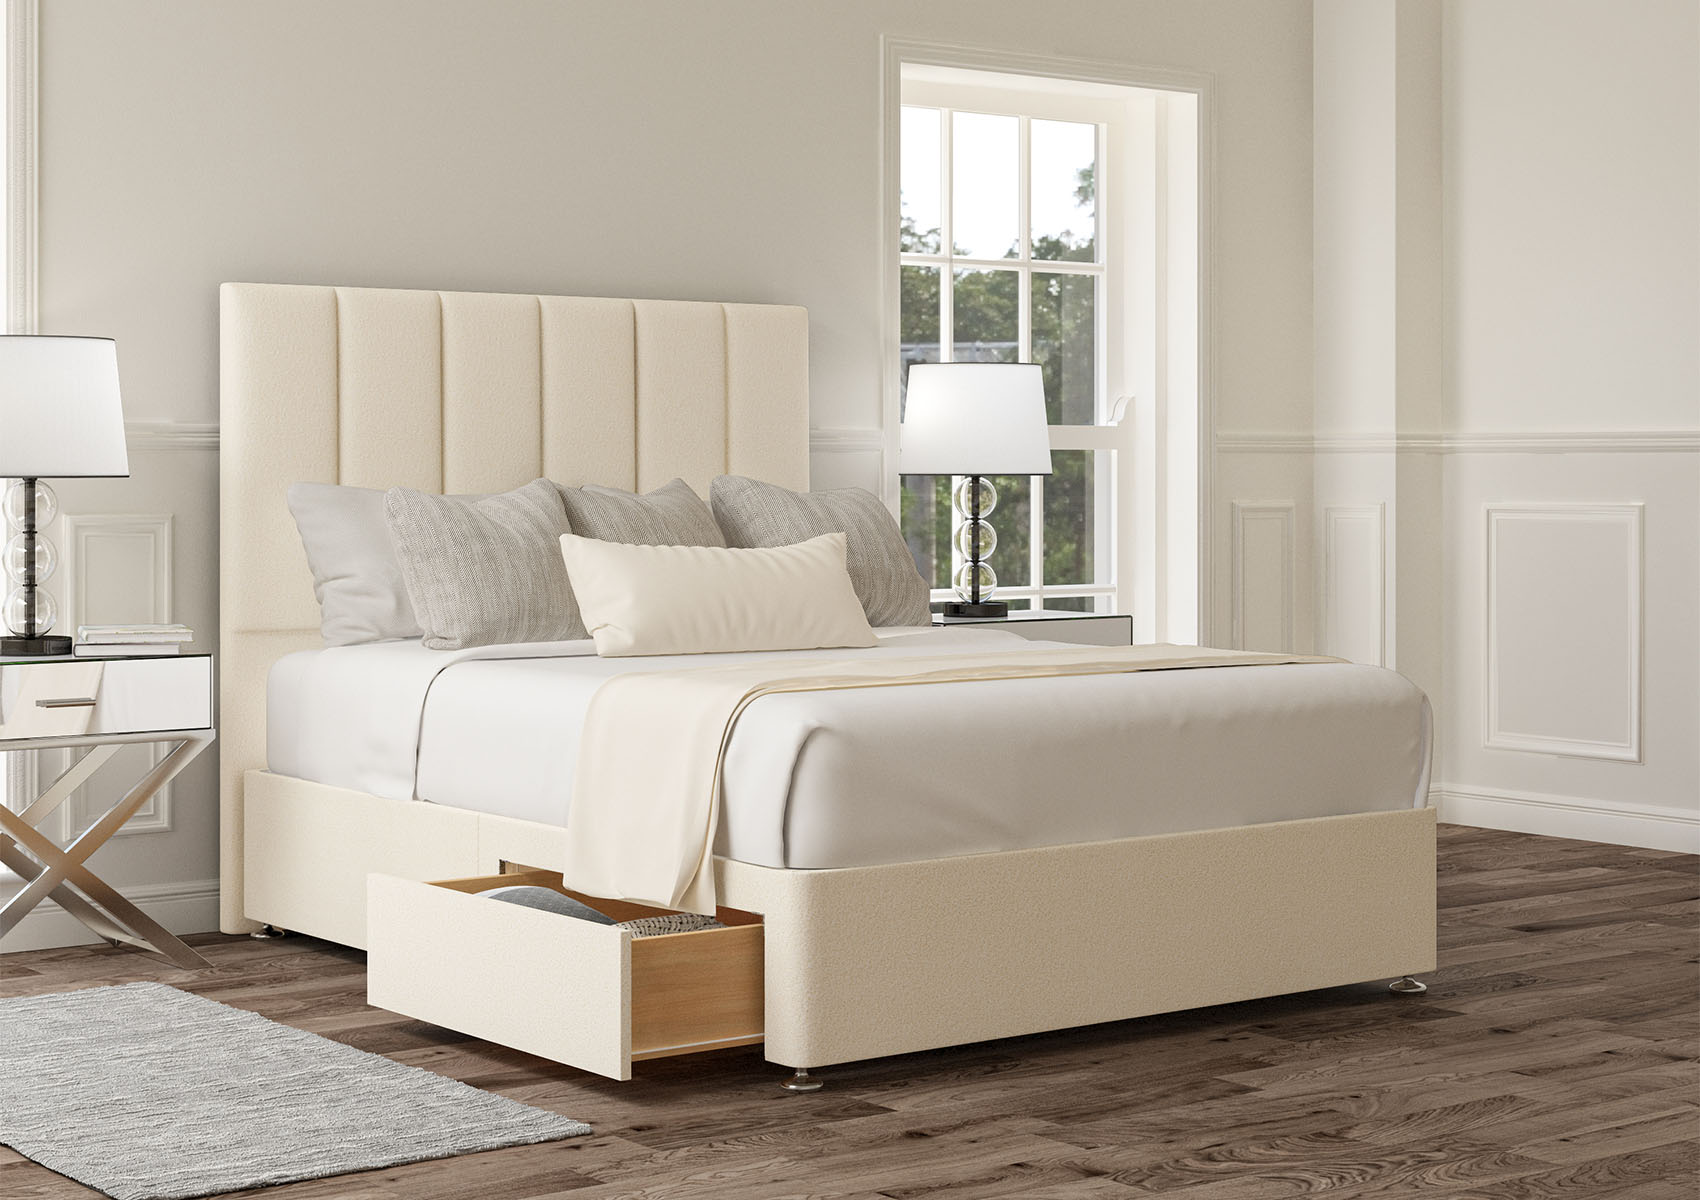 View Empire Carina Parchment Upholstered King Size Divan Bed Time4Sleep information